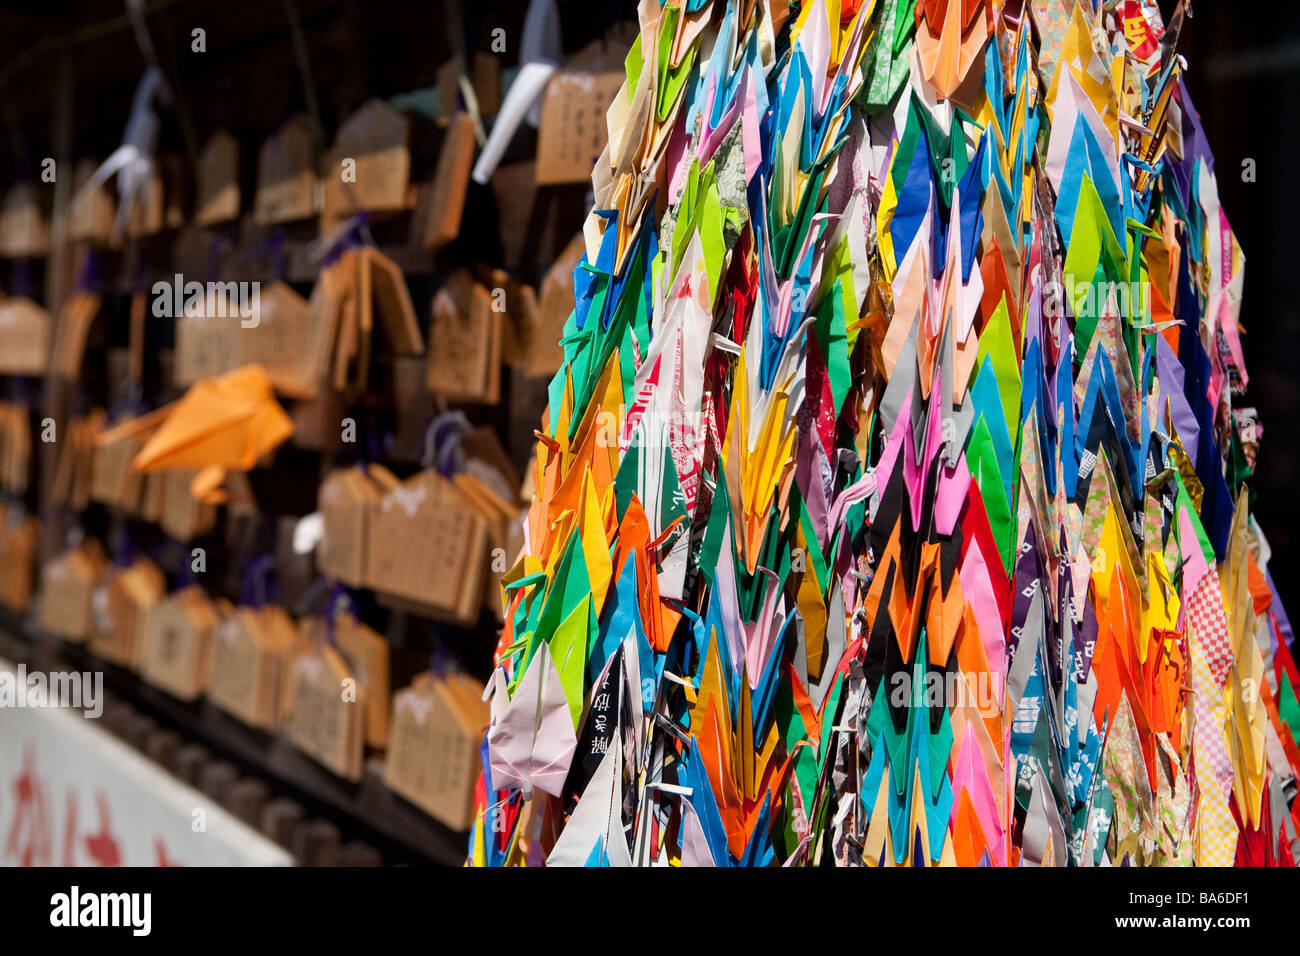 Wishes written near the Shrine & Origami cranes for good luck Stock Photo